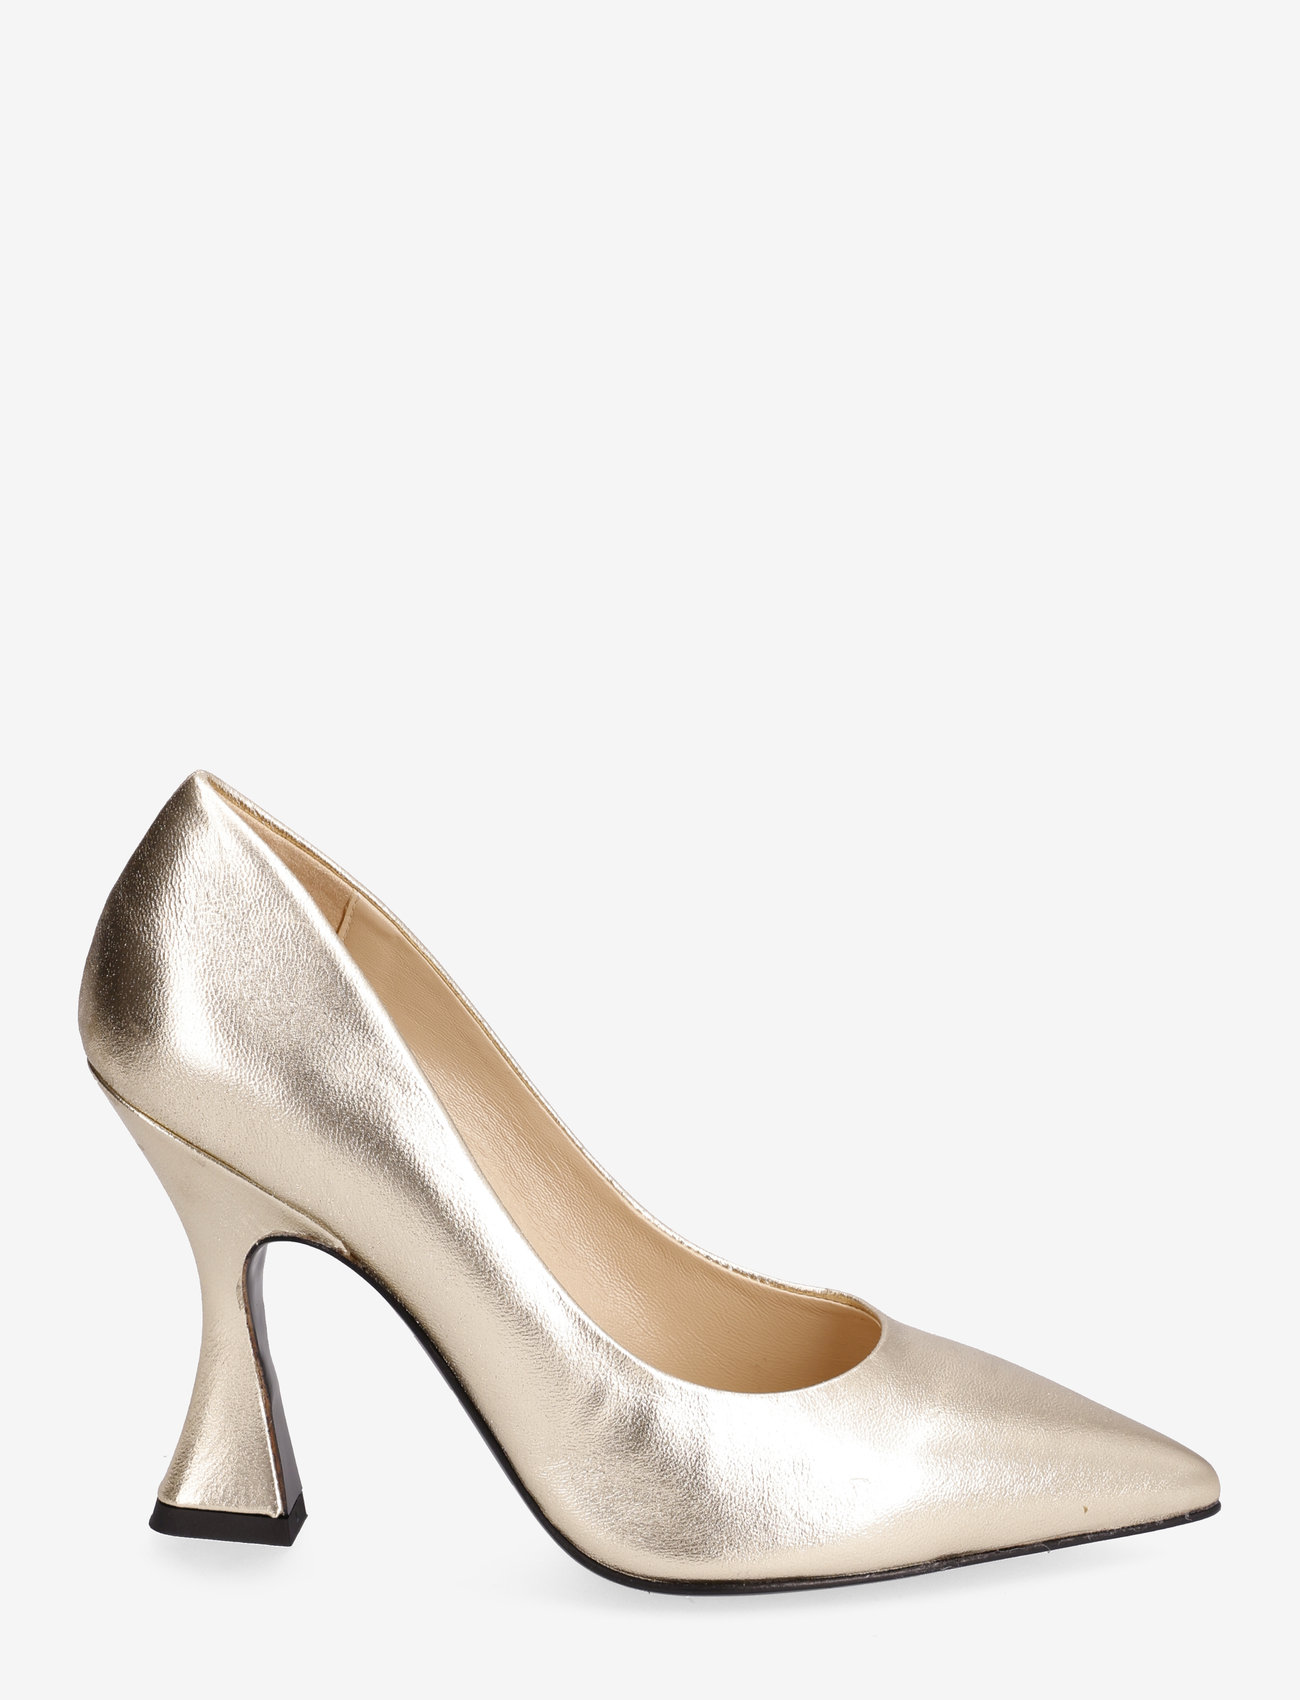 Apair - New trend pump - party wear at outlet prices - platino - 1